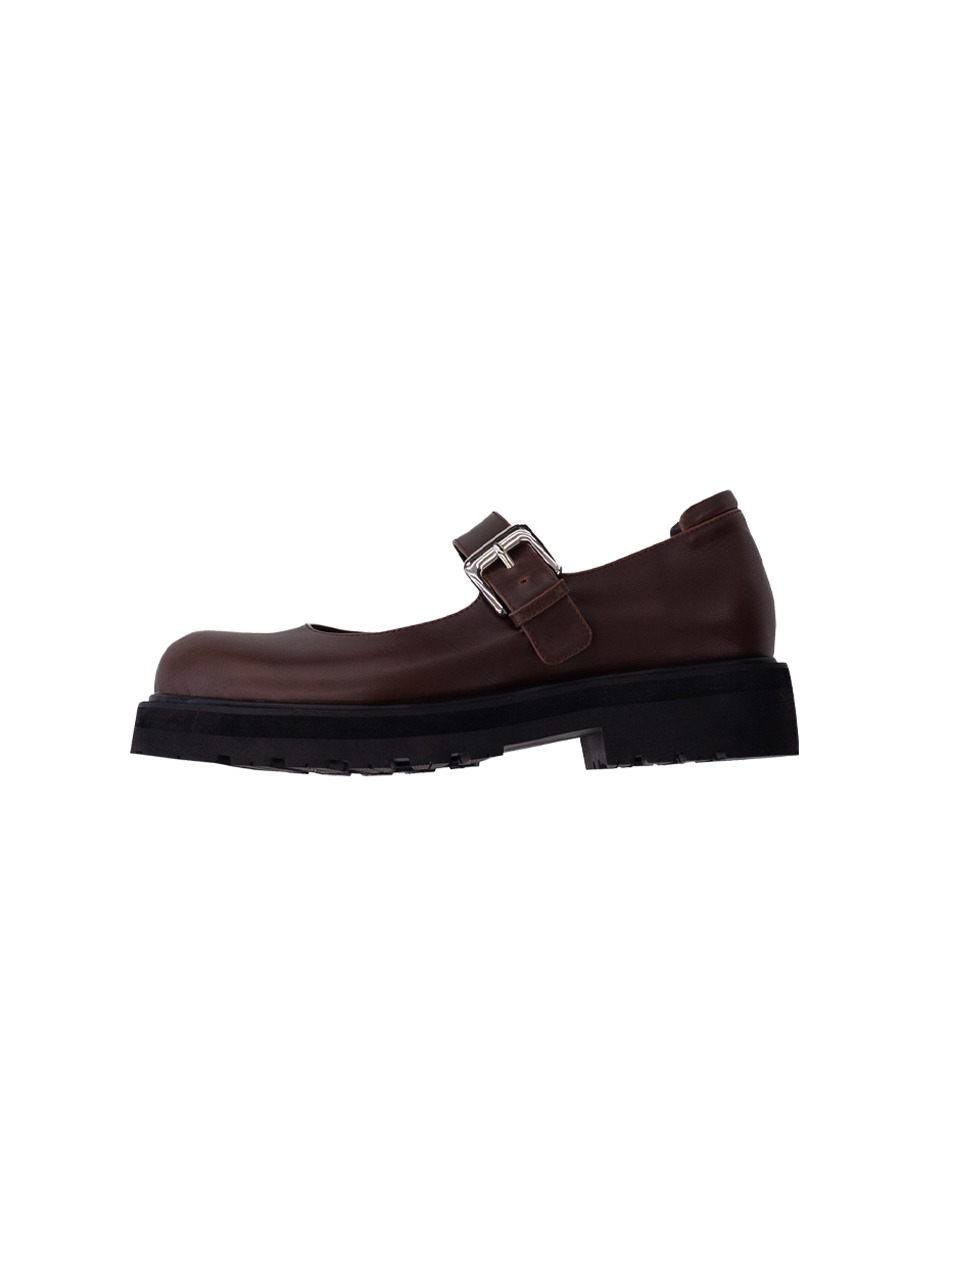 LECYTO - STRAP MARY JANE SHOES (BROWN)